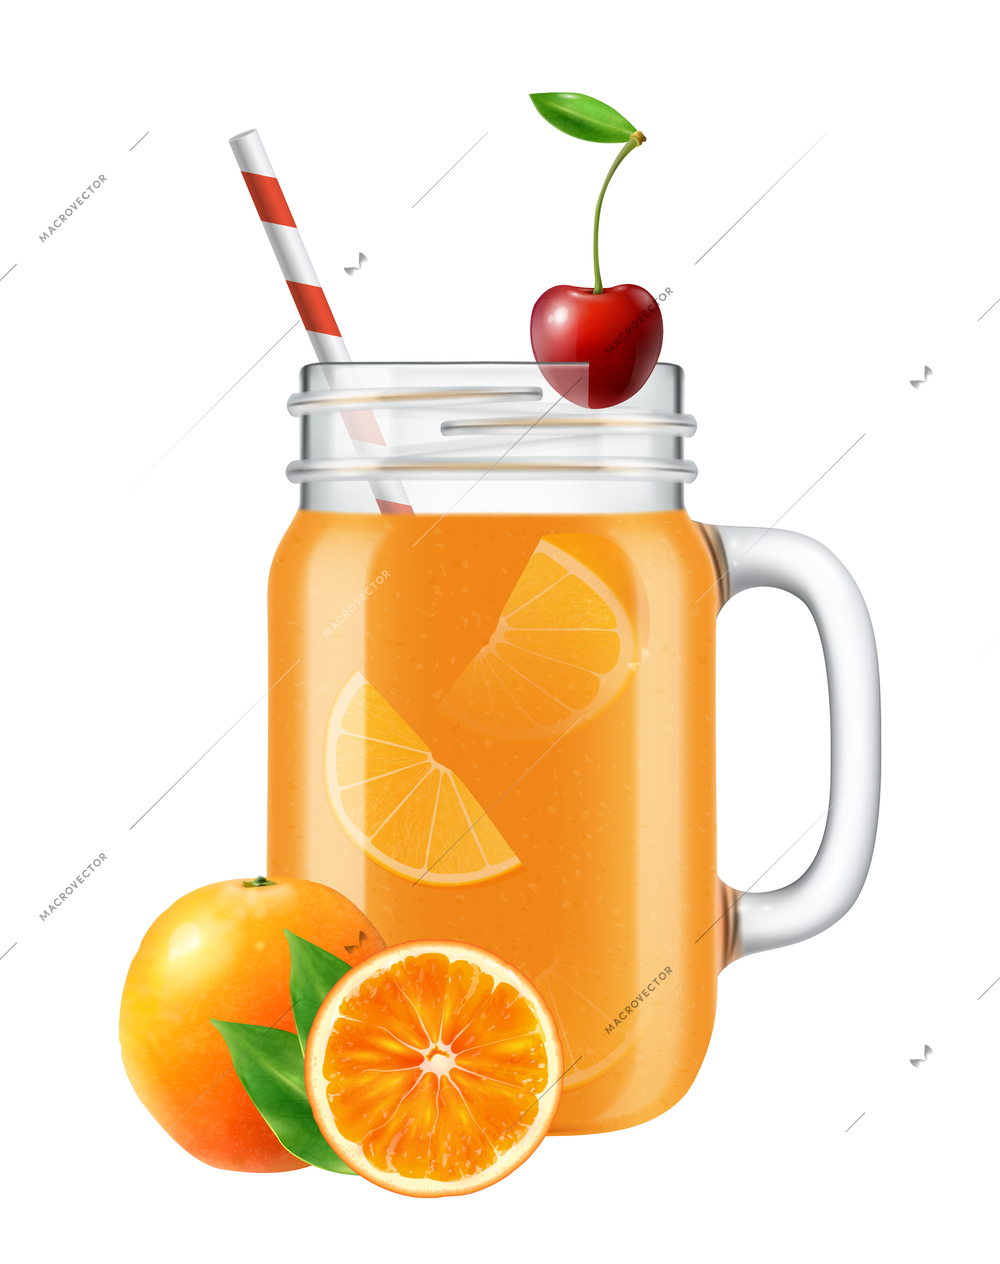 Realistic jar smoothie composition with images of oranges and glass jar with floating slices inside vector illustration